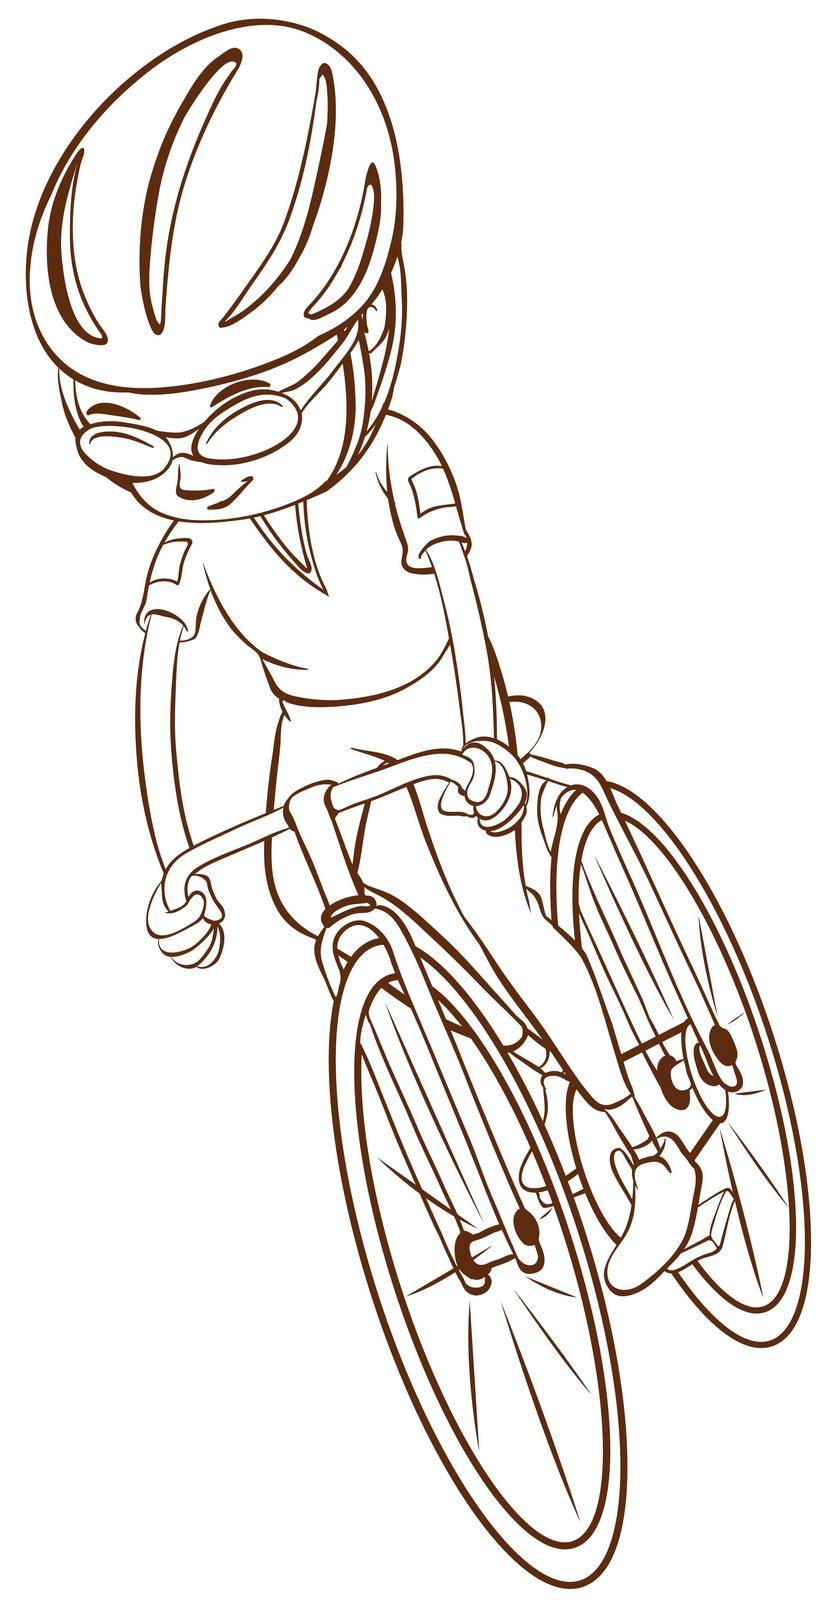 A plain sketch of a cyclist by iimages